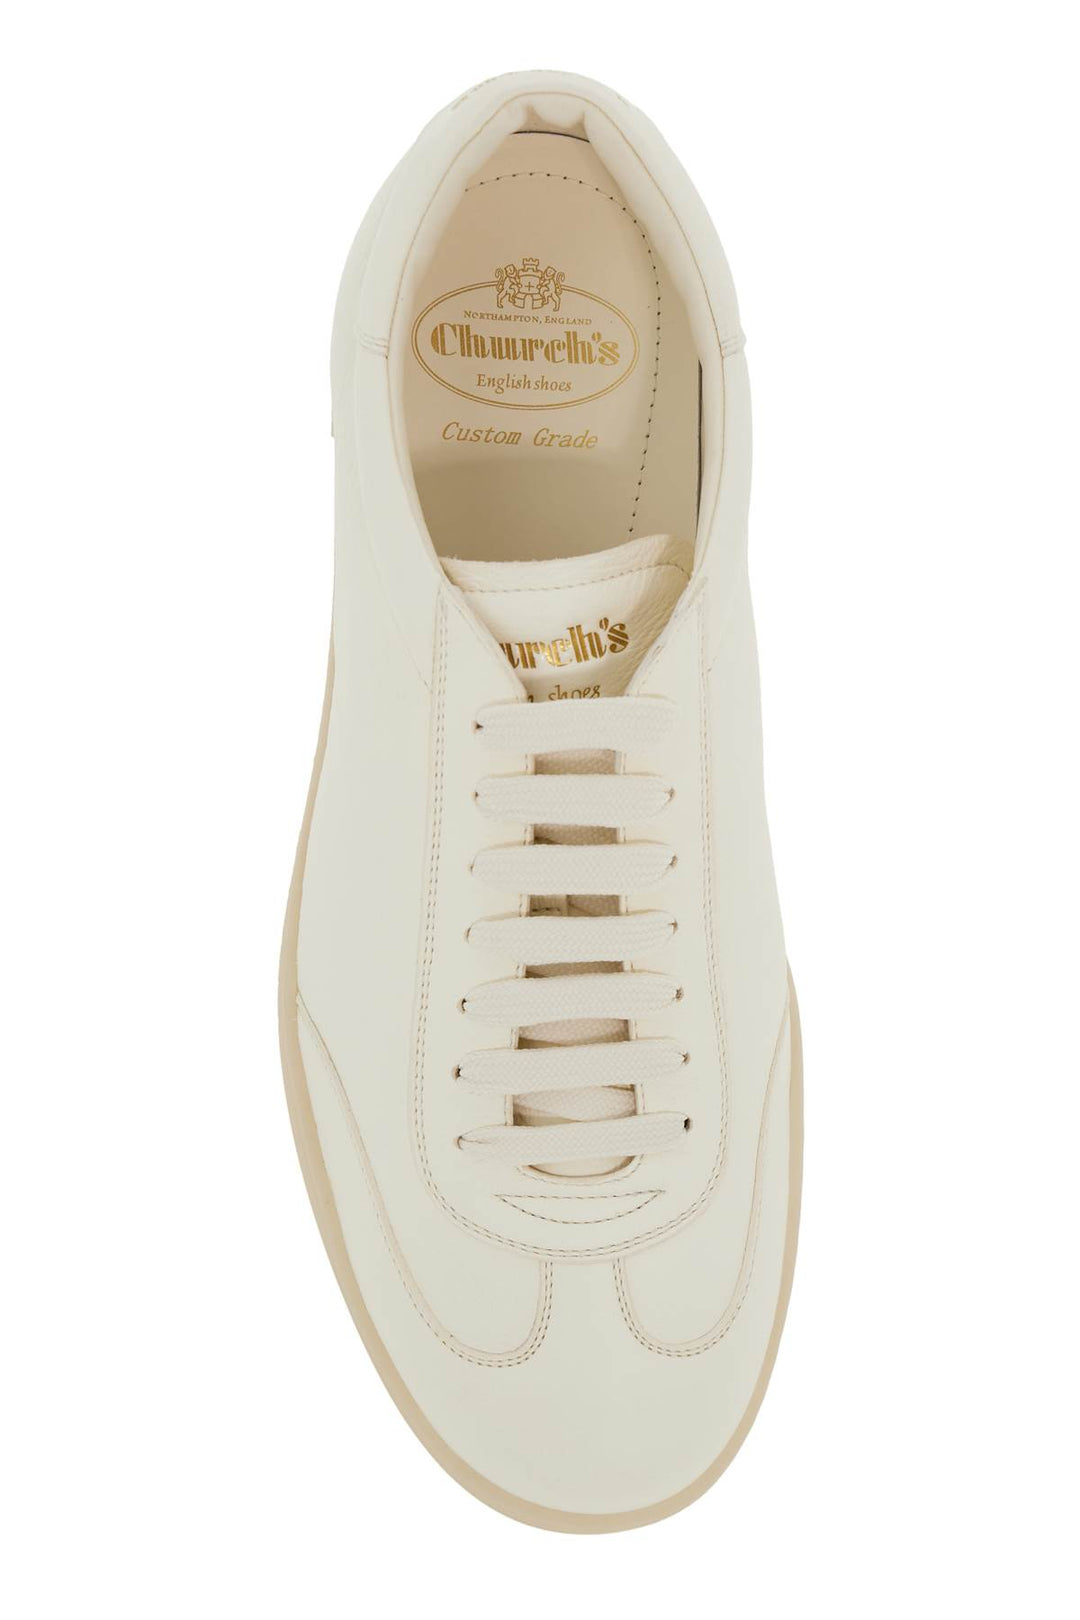 Church's Large 2 Sneakers   White